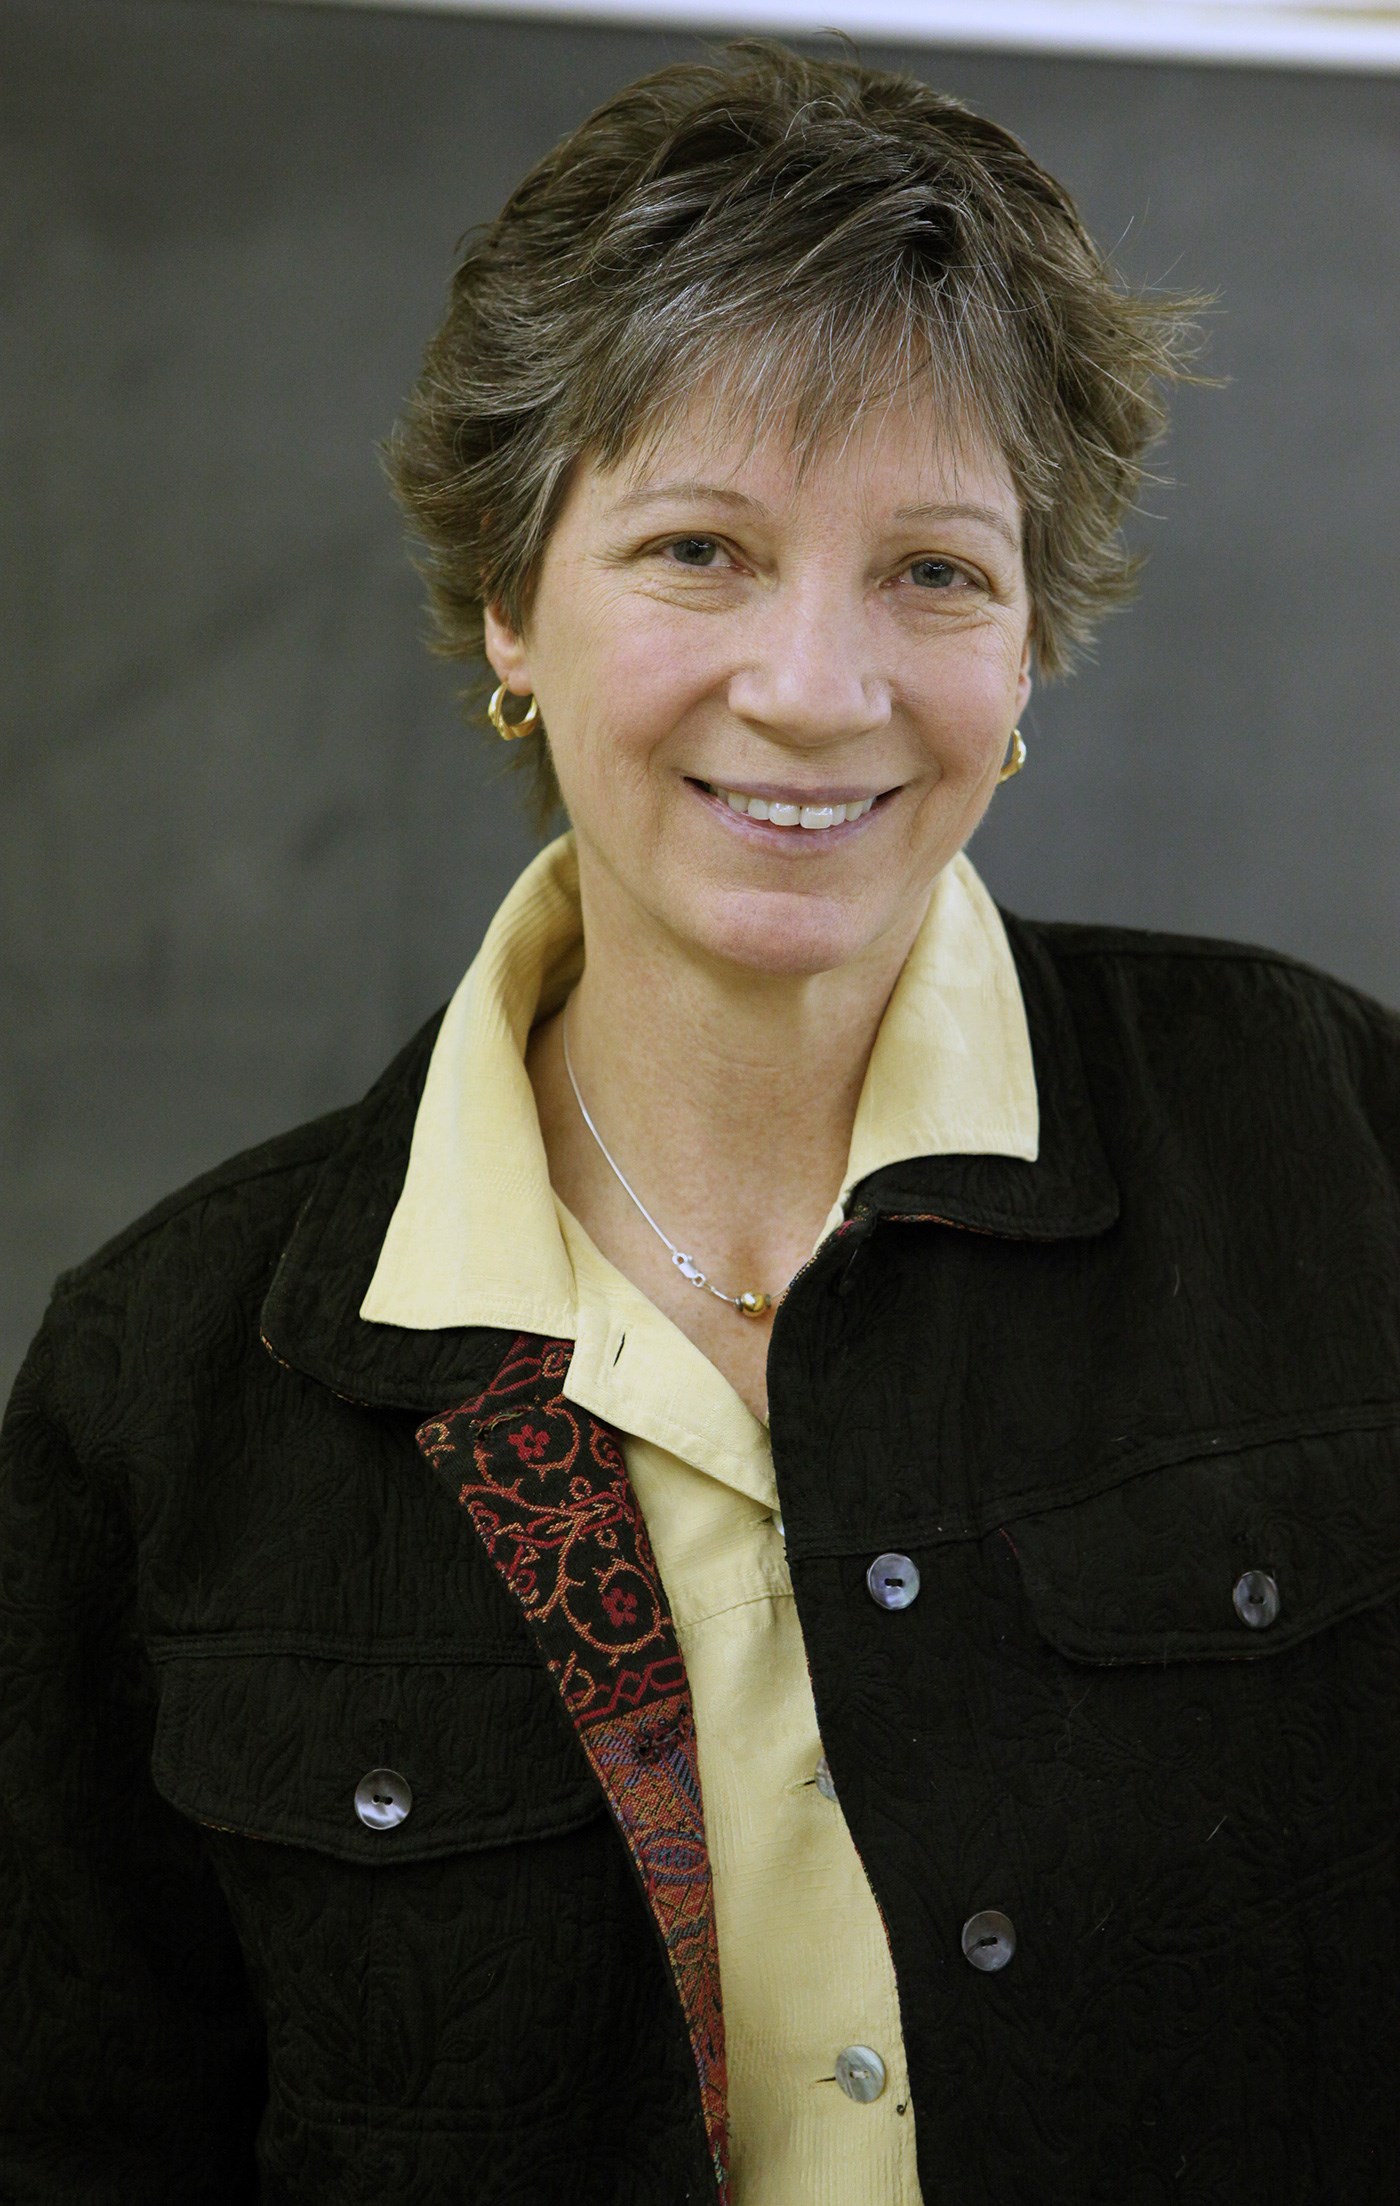 Lynne Samuelson is the HEROES Co-Director at UMass Lowell.